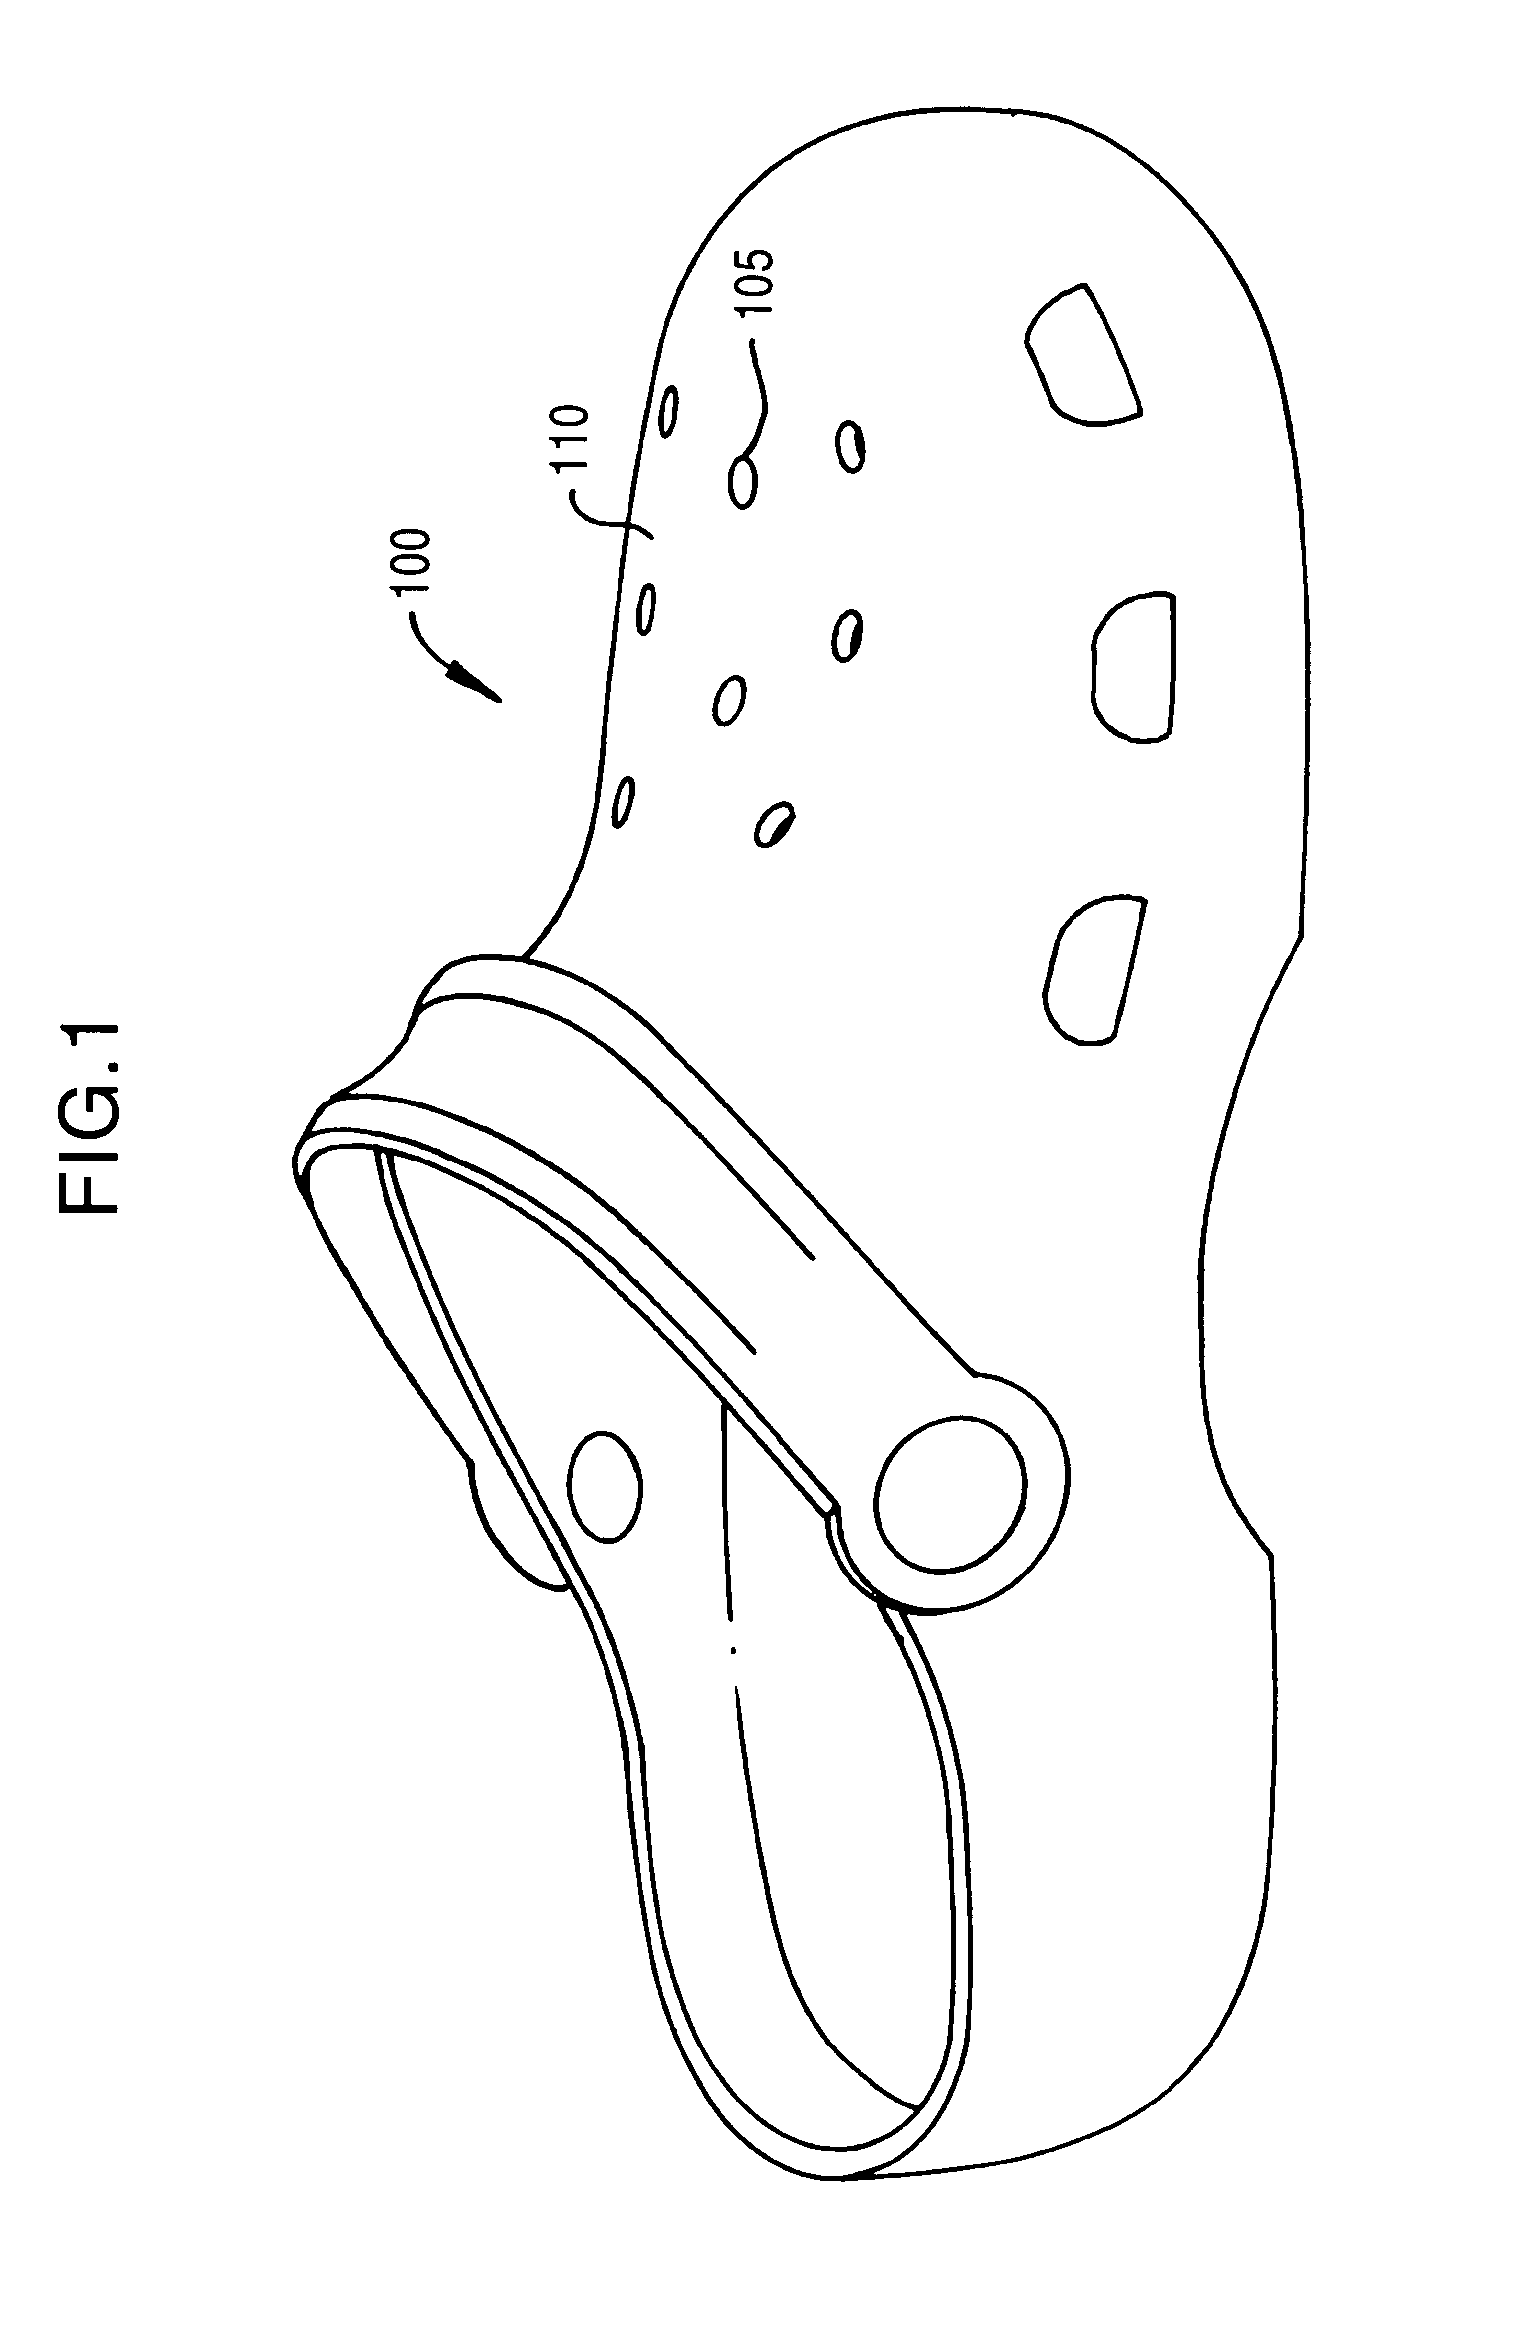 System and method for securing accessories to clothing